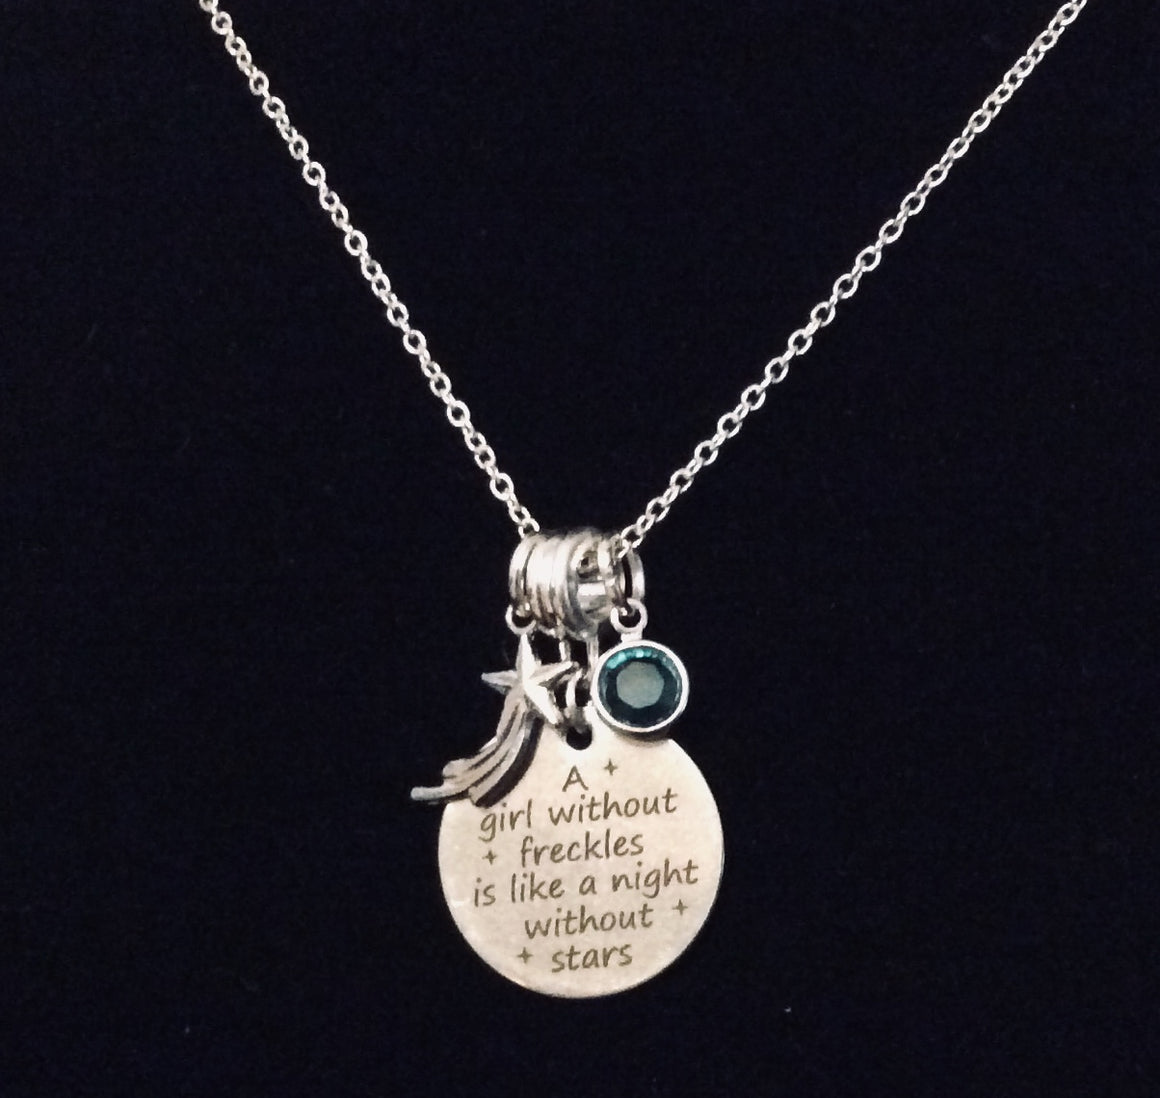 A Girl Without Freckles is Like a Night Without Stars Silver Charm Pendant Necklace with Birthstone Inspirational